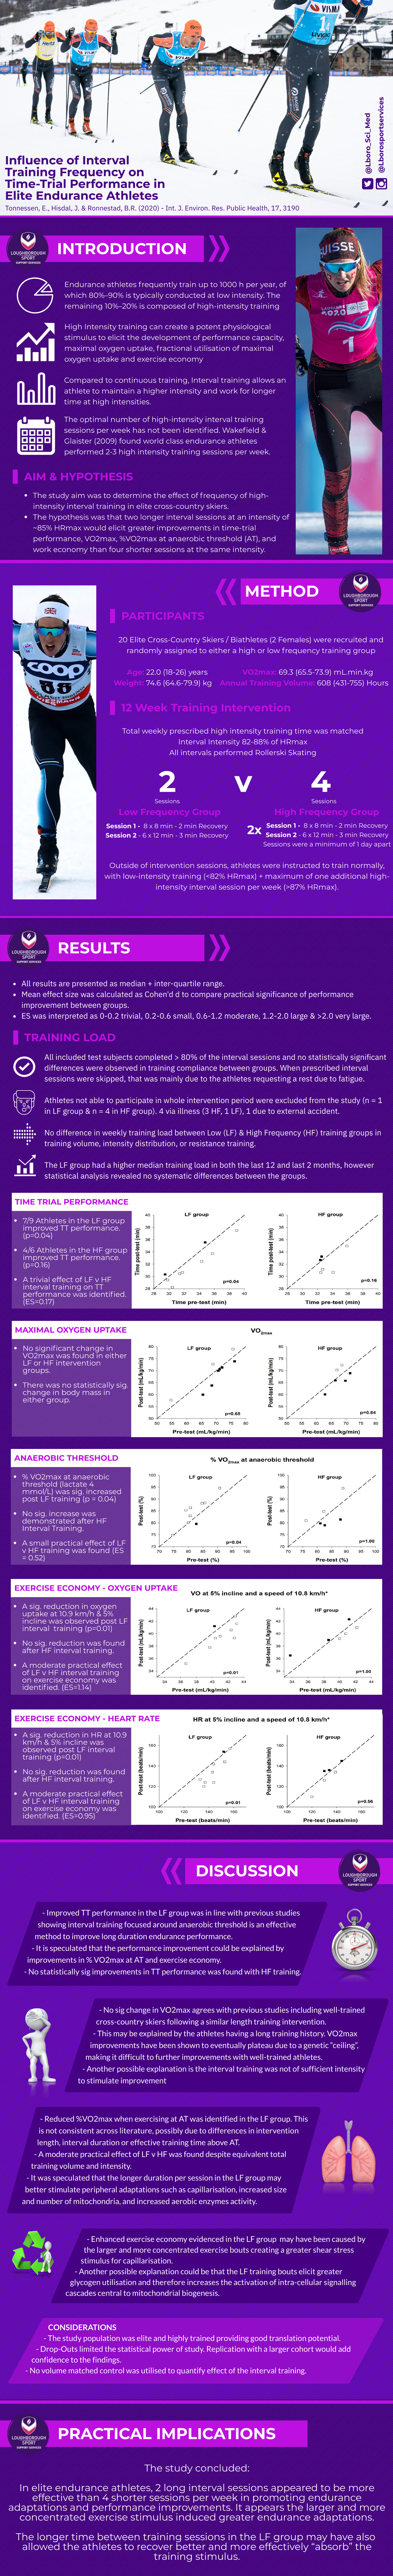 Influence of Interval Training Frequency on Time-Trial Performance in Elite Endurance Athletes. A multi-page infographic